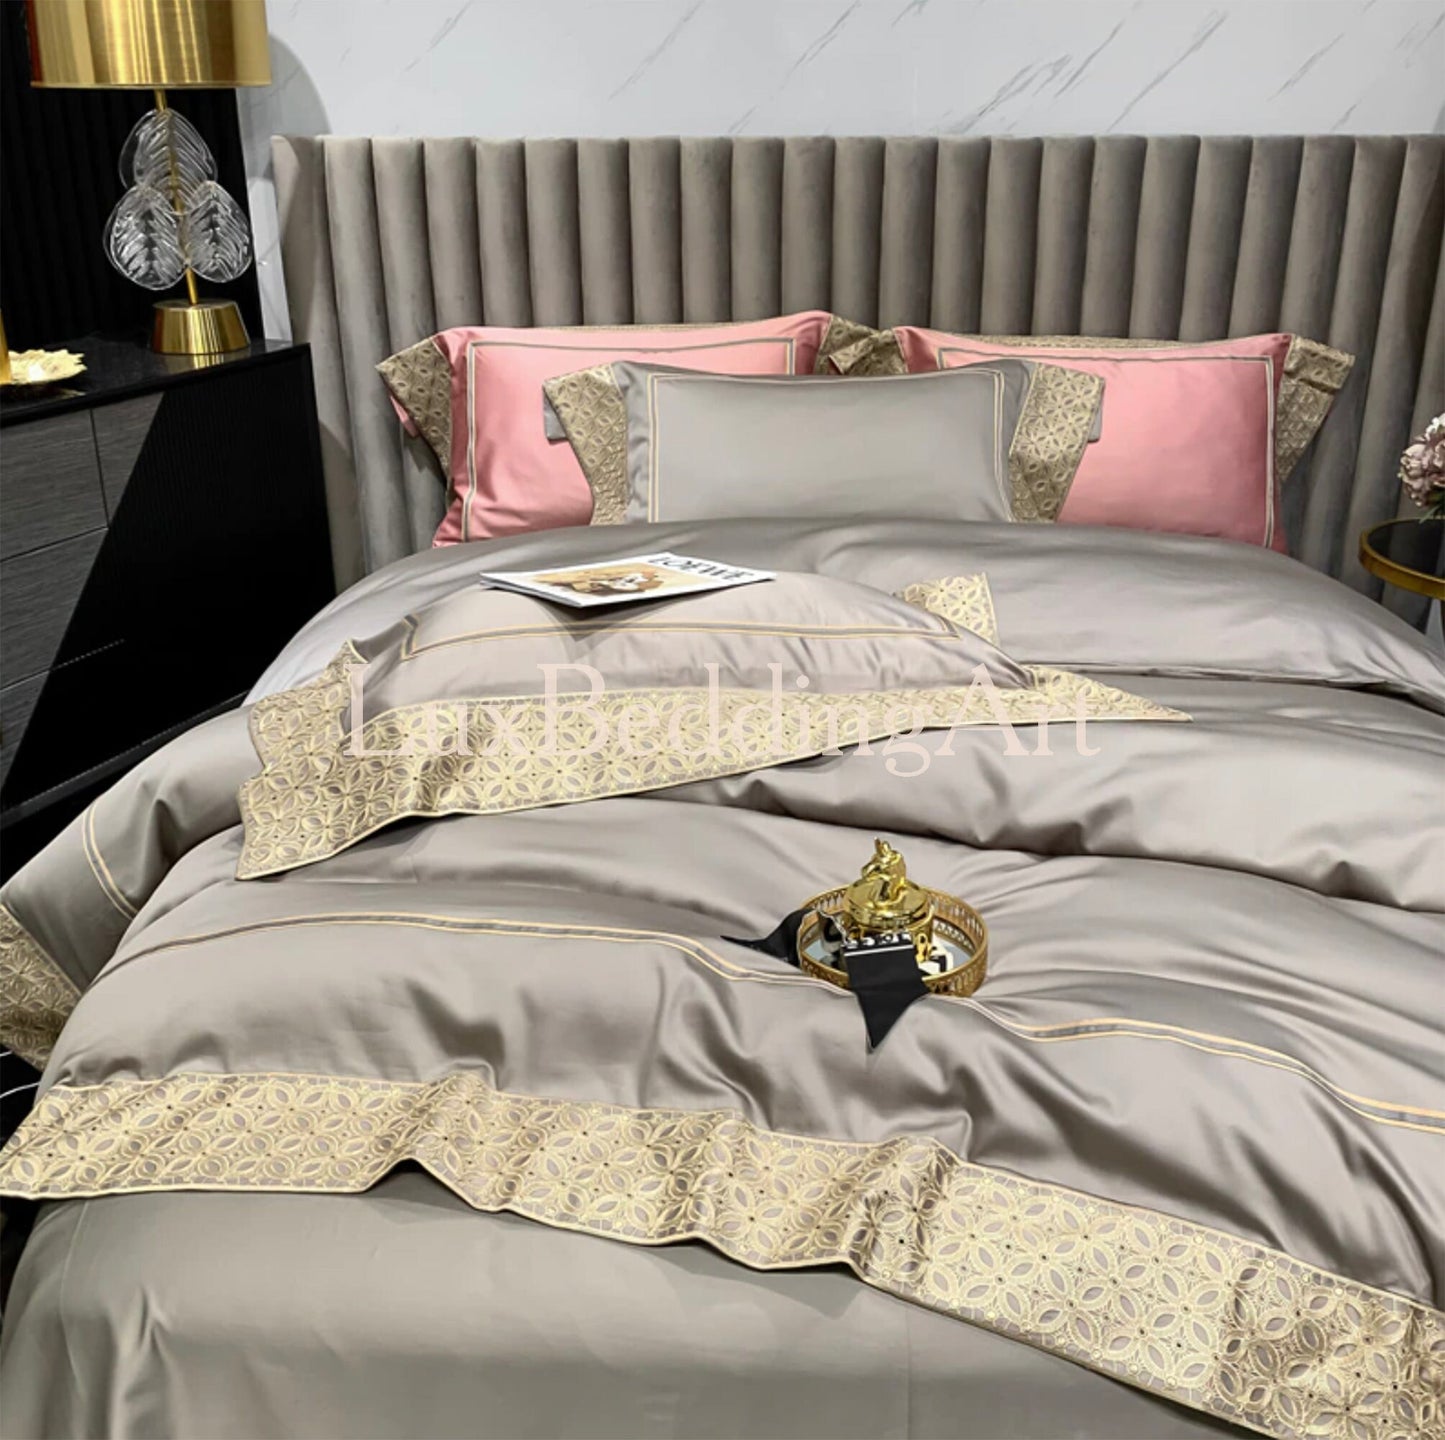 Luxury Elegant Beige&Gold Egyptian Cotton Bedding Set with Gold Edge Embroidery • Duvet Cover Set • Bed Sheet • Pillowcases